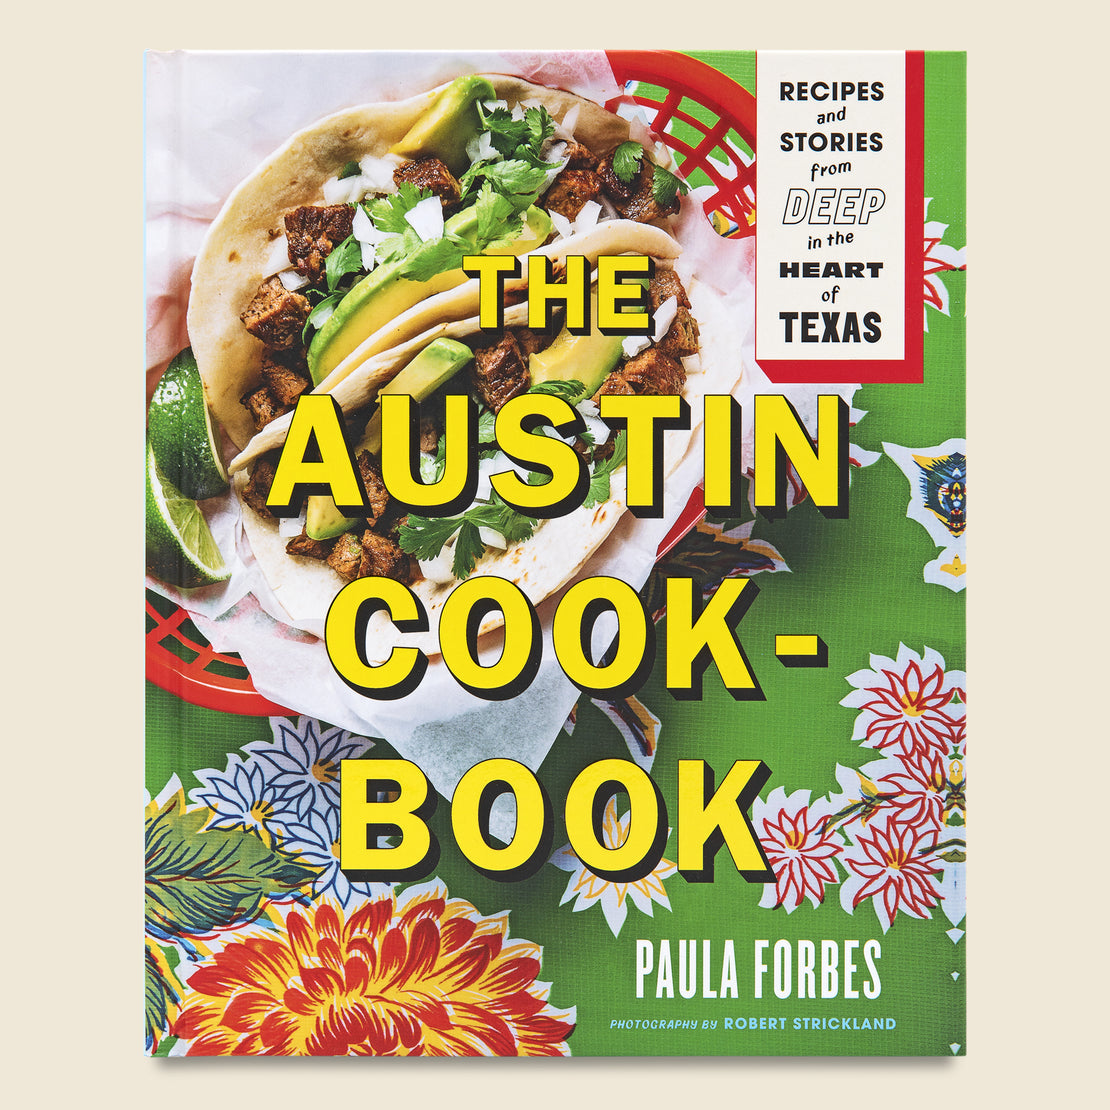 Bookstore The Austin Cookbook: Recipes & Stories From Deep in the Heart of Texas